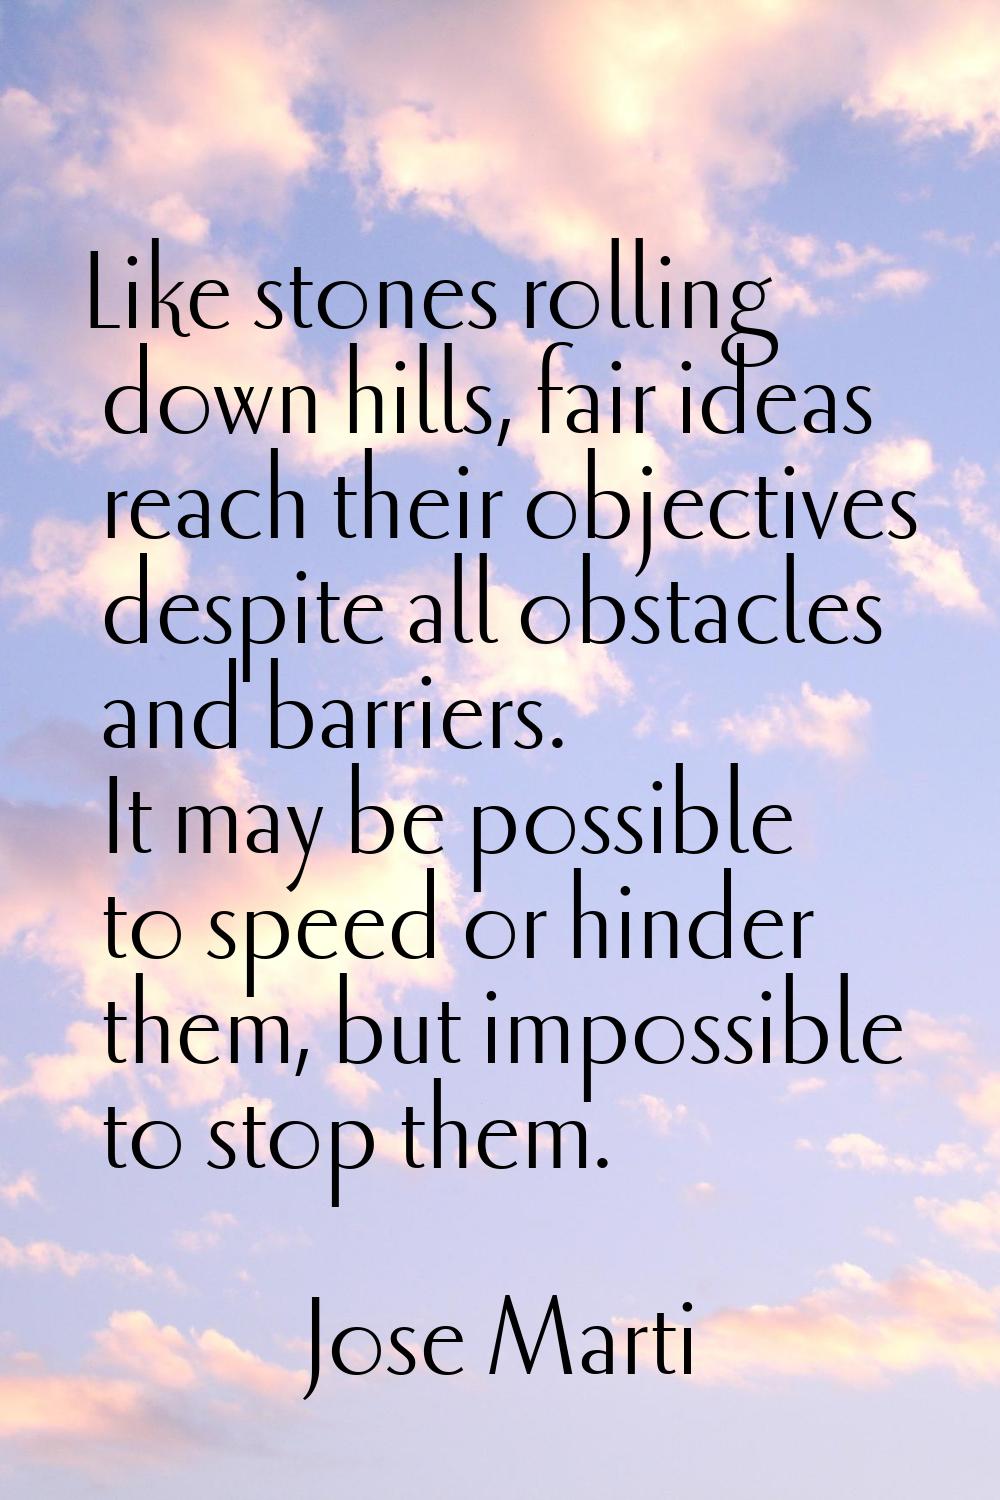 Like stones rolling down hills, fair ideas reach their objectives despite all obstacles and barrier